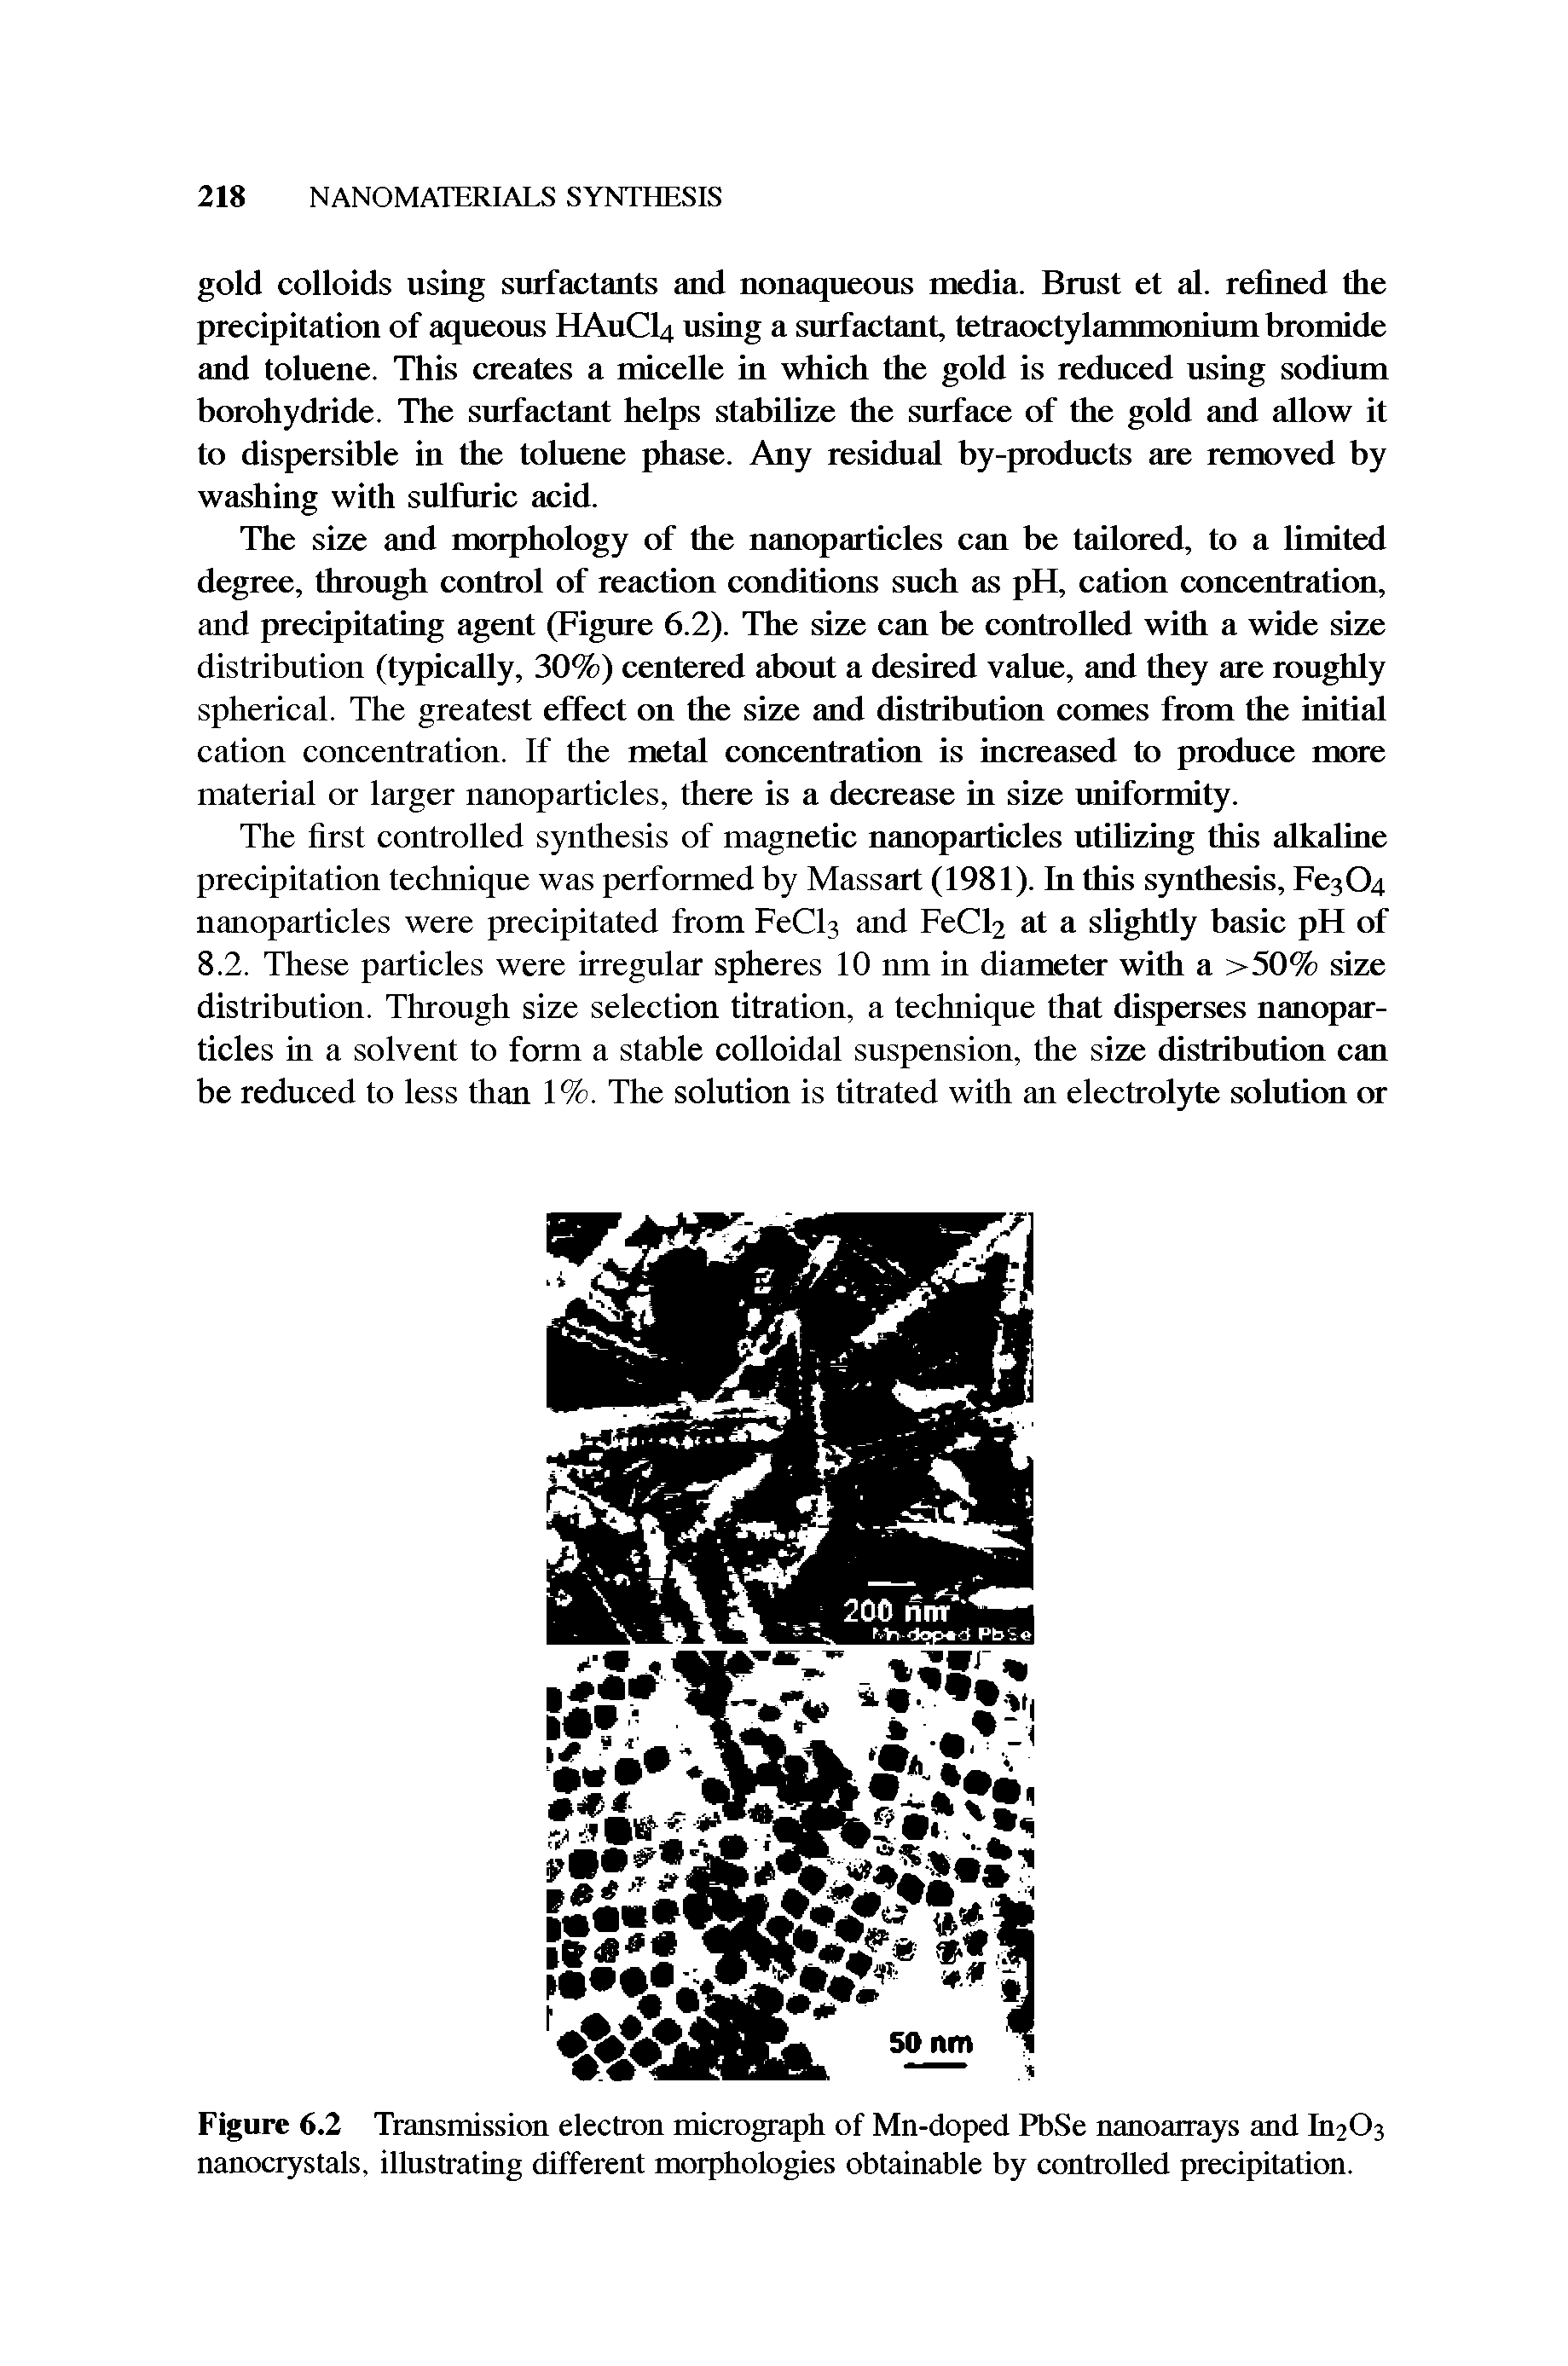 Figure 6.2 Transmission electron micrograph of Mn-doped PbSe nanoarrays and In203 nanocrystals, illustrating different morphologies obtainable by controlled precipitation.